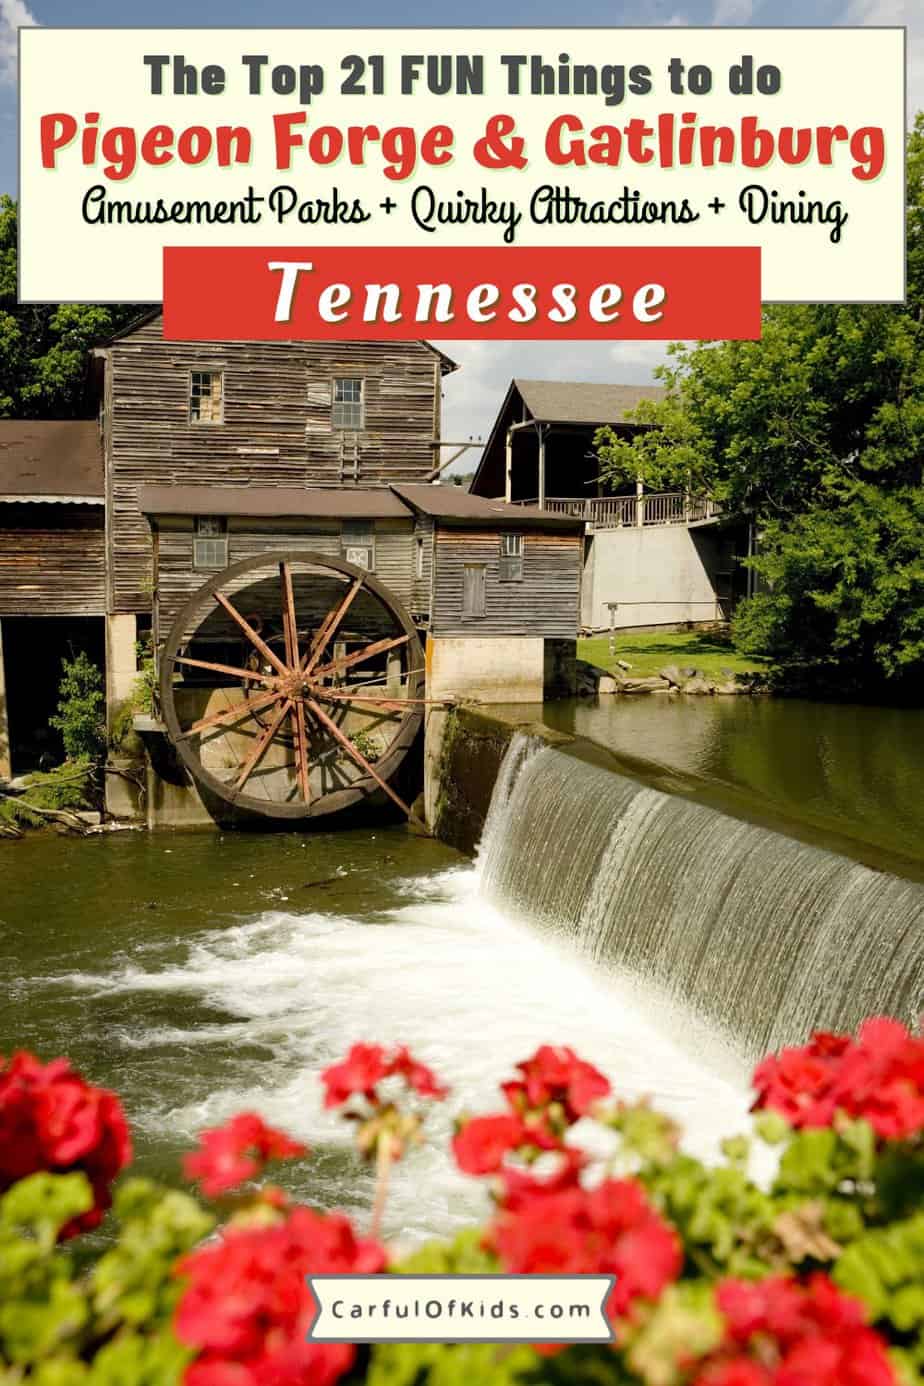 Head to the Smokies in Tennessee for a four-season getaway centered around outdoor adventure and unique attractions. Home to Dollywood, Great Smoky Mountains National Park along with the Ober Gatlinburg Mountain Resort. Also find lodging, dining, live entertainment and shopping in the gateway towns just north of the National Park. What to do in the Smokies | What do to in Pigeon Forge | Where's Gatlinburg | Smoky Mountain cabins #Tennessee #PigeonForge #Gatlinburg 